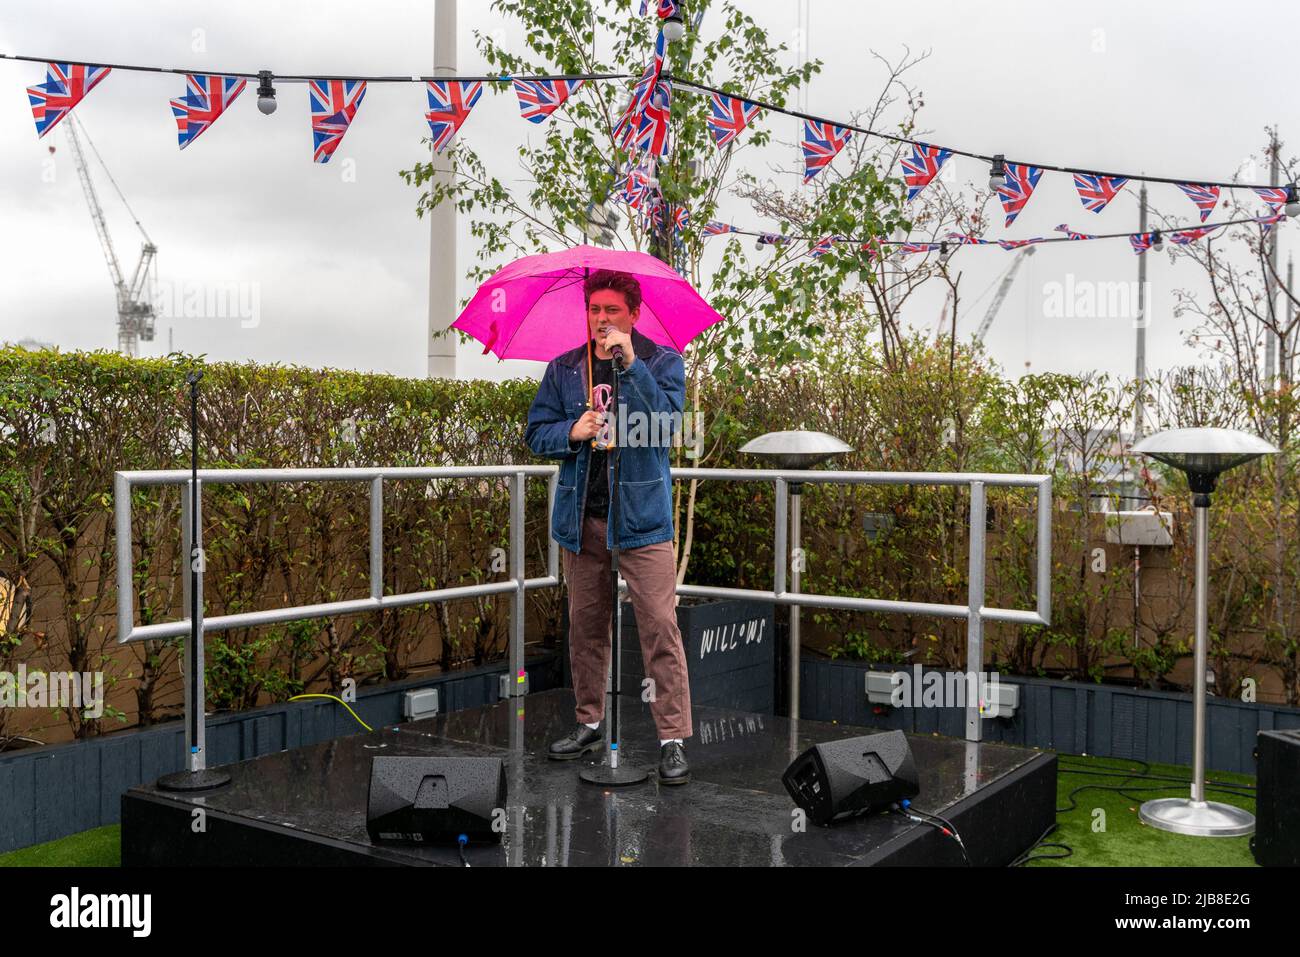 Tom Francis who plays Romeo in West End Musical '& Juliet' sings in the rain on John Lewis rooftop. The Second performance in the 'Sing it from the Rooftops' series. Surprise, pop-up performances was from & Juliet The Musical, lead actors Miriam-Teak Lee (Juliet) and Tom Francis (Romeo) performed songs from the multi-award-winning musical at Willows on the Rooftop of the iconic John Lewis and Partnersí Oxford Street store. 'Sing it from the Rooftops' is a teaser campaign for West End Live, to pre-promote Europe's biggest free musical theatre festival which returns on Saturday 25 & Sunday 26 Ju Stock Photo